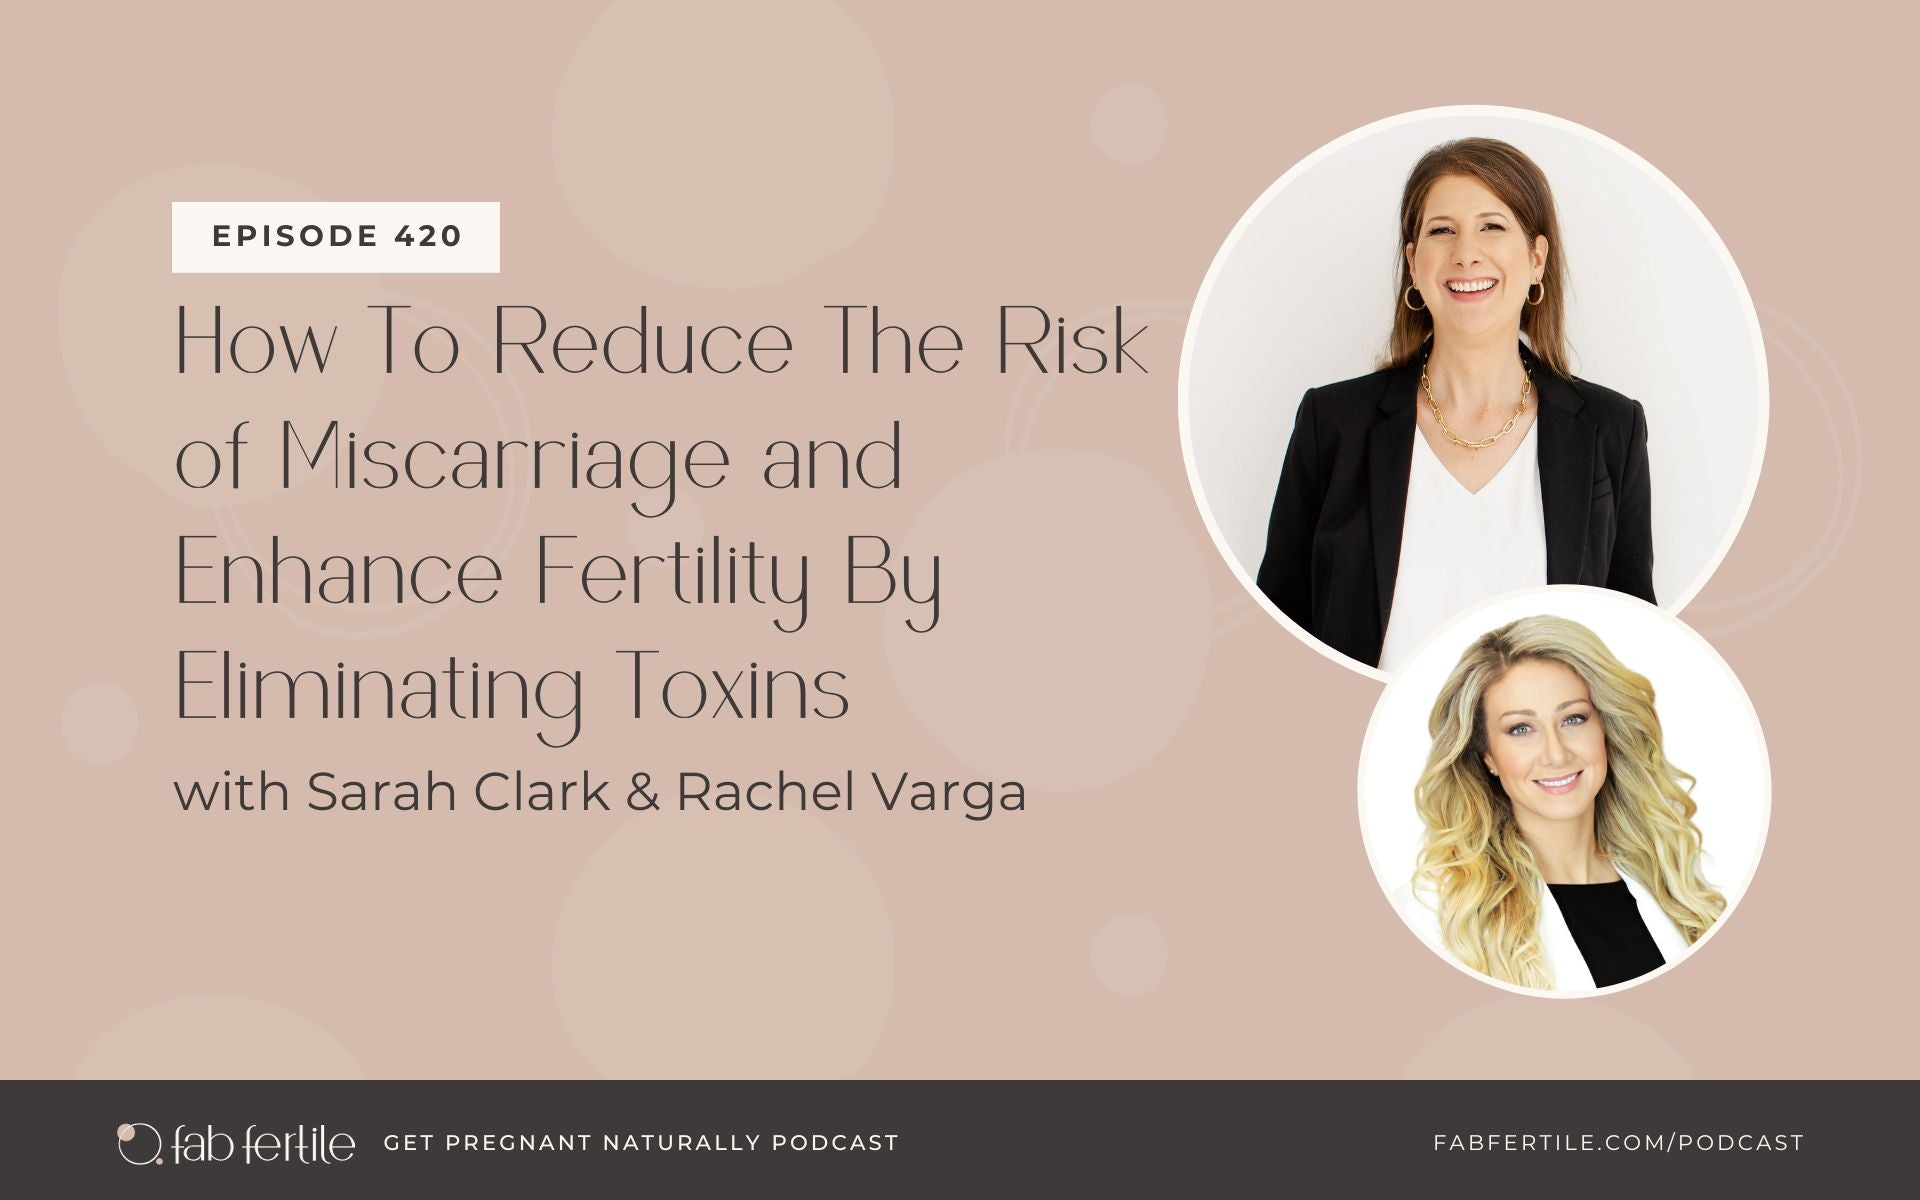 How To Reduce The Risk of Miscarriage and Enhance Fertility By Eliminating Toxins with Rachel Varga